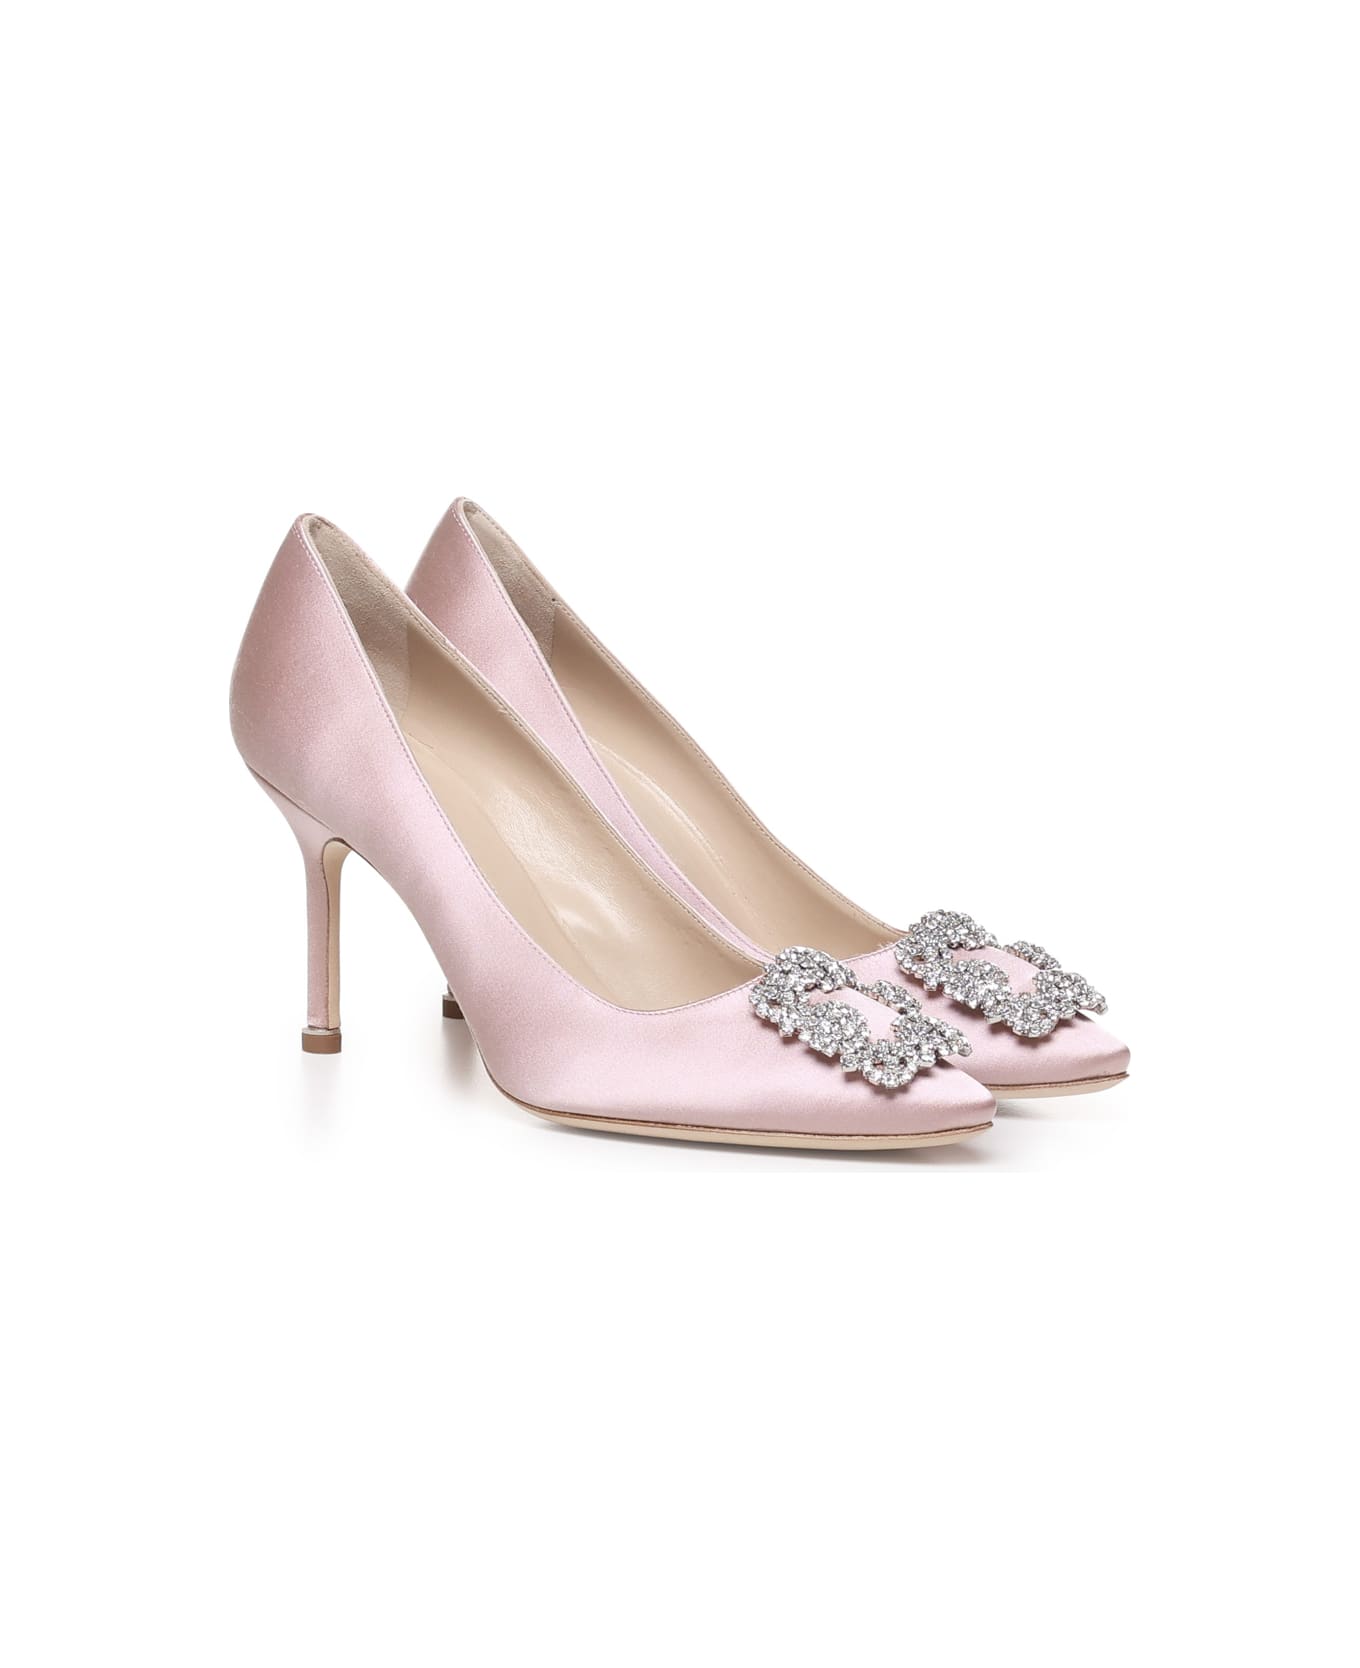 Manolo Blahnik 90mm Décolleté With Satin Jewel Buckle - Pink ハイヒール